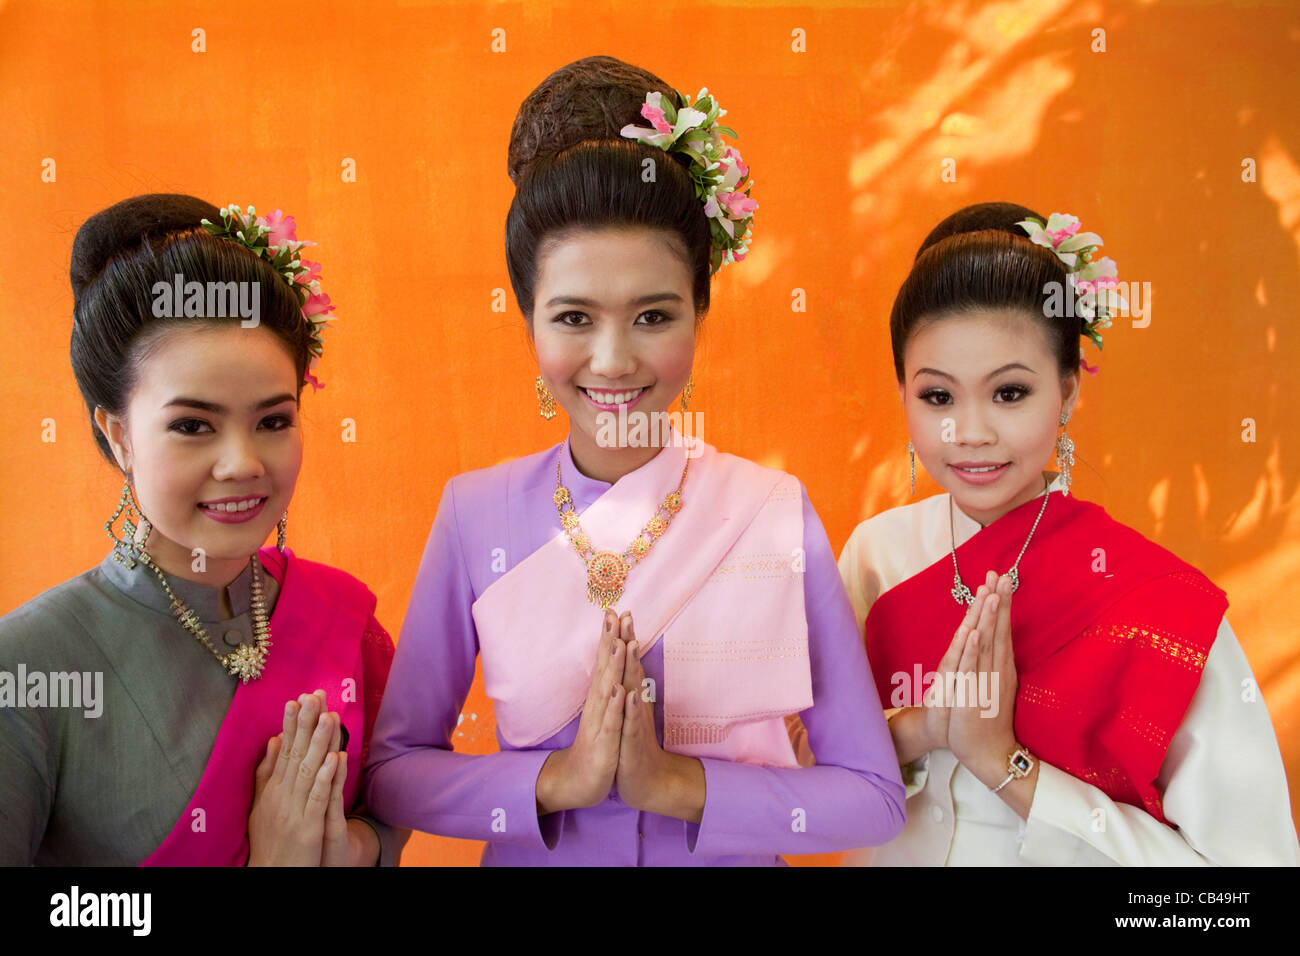 Thailand, Chiang Mai, Chiang Mai Flower Festival, Beauty Queens in Traditional Thai Costume Stock Photo